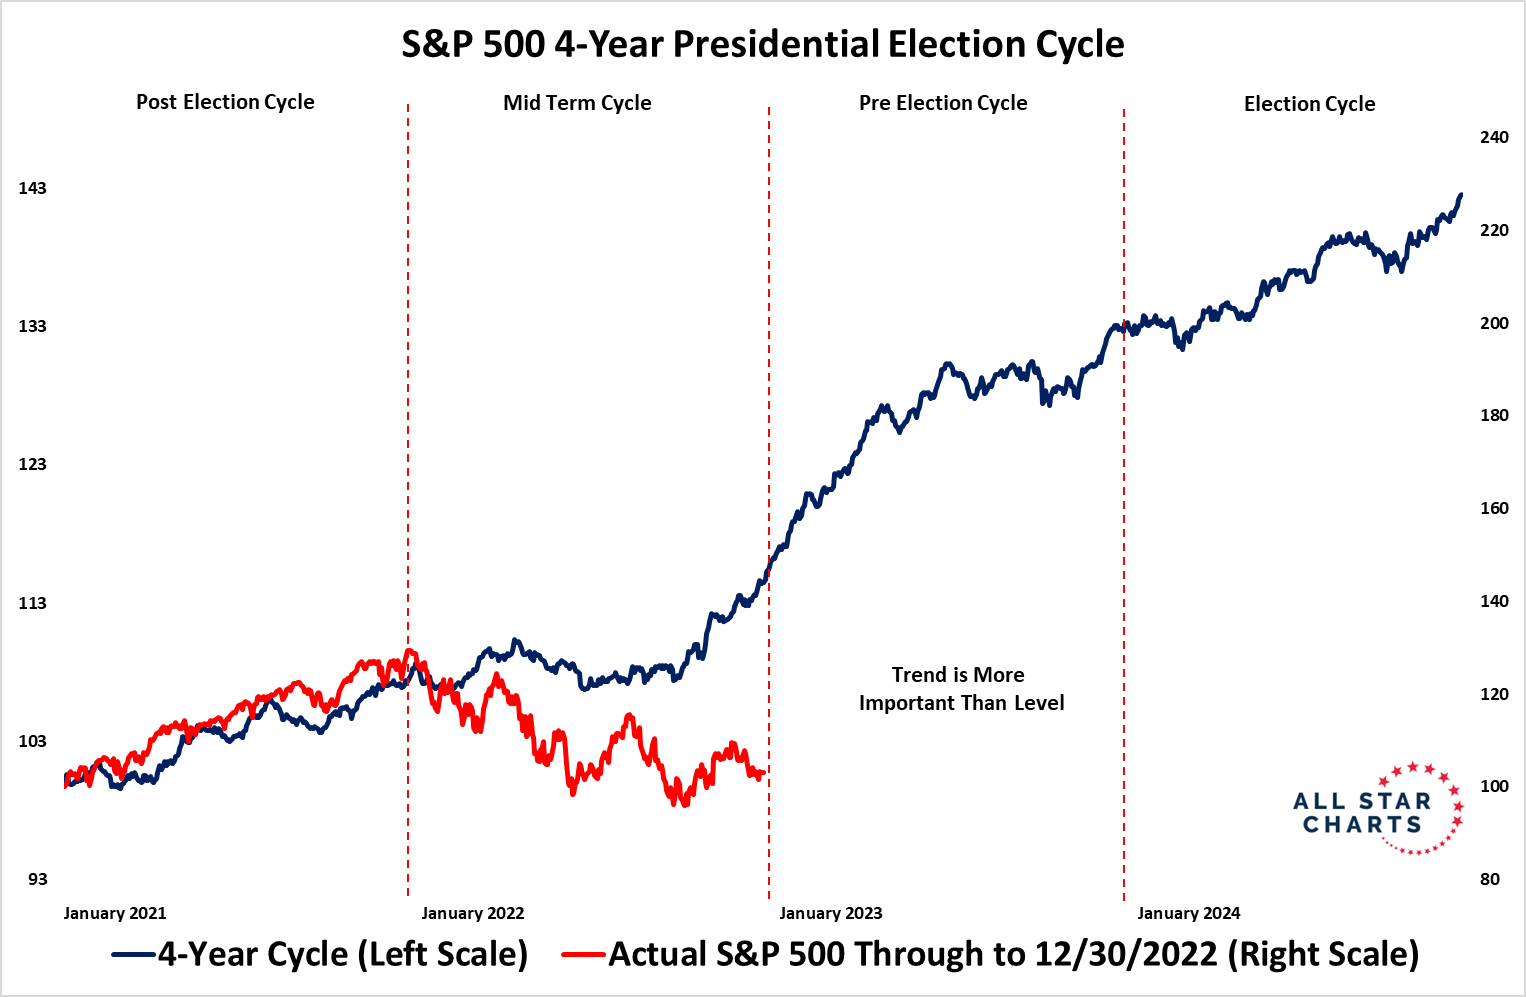 The S&P 500 4-year Presidential cycle